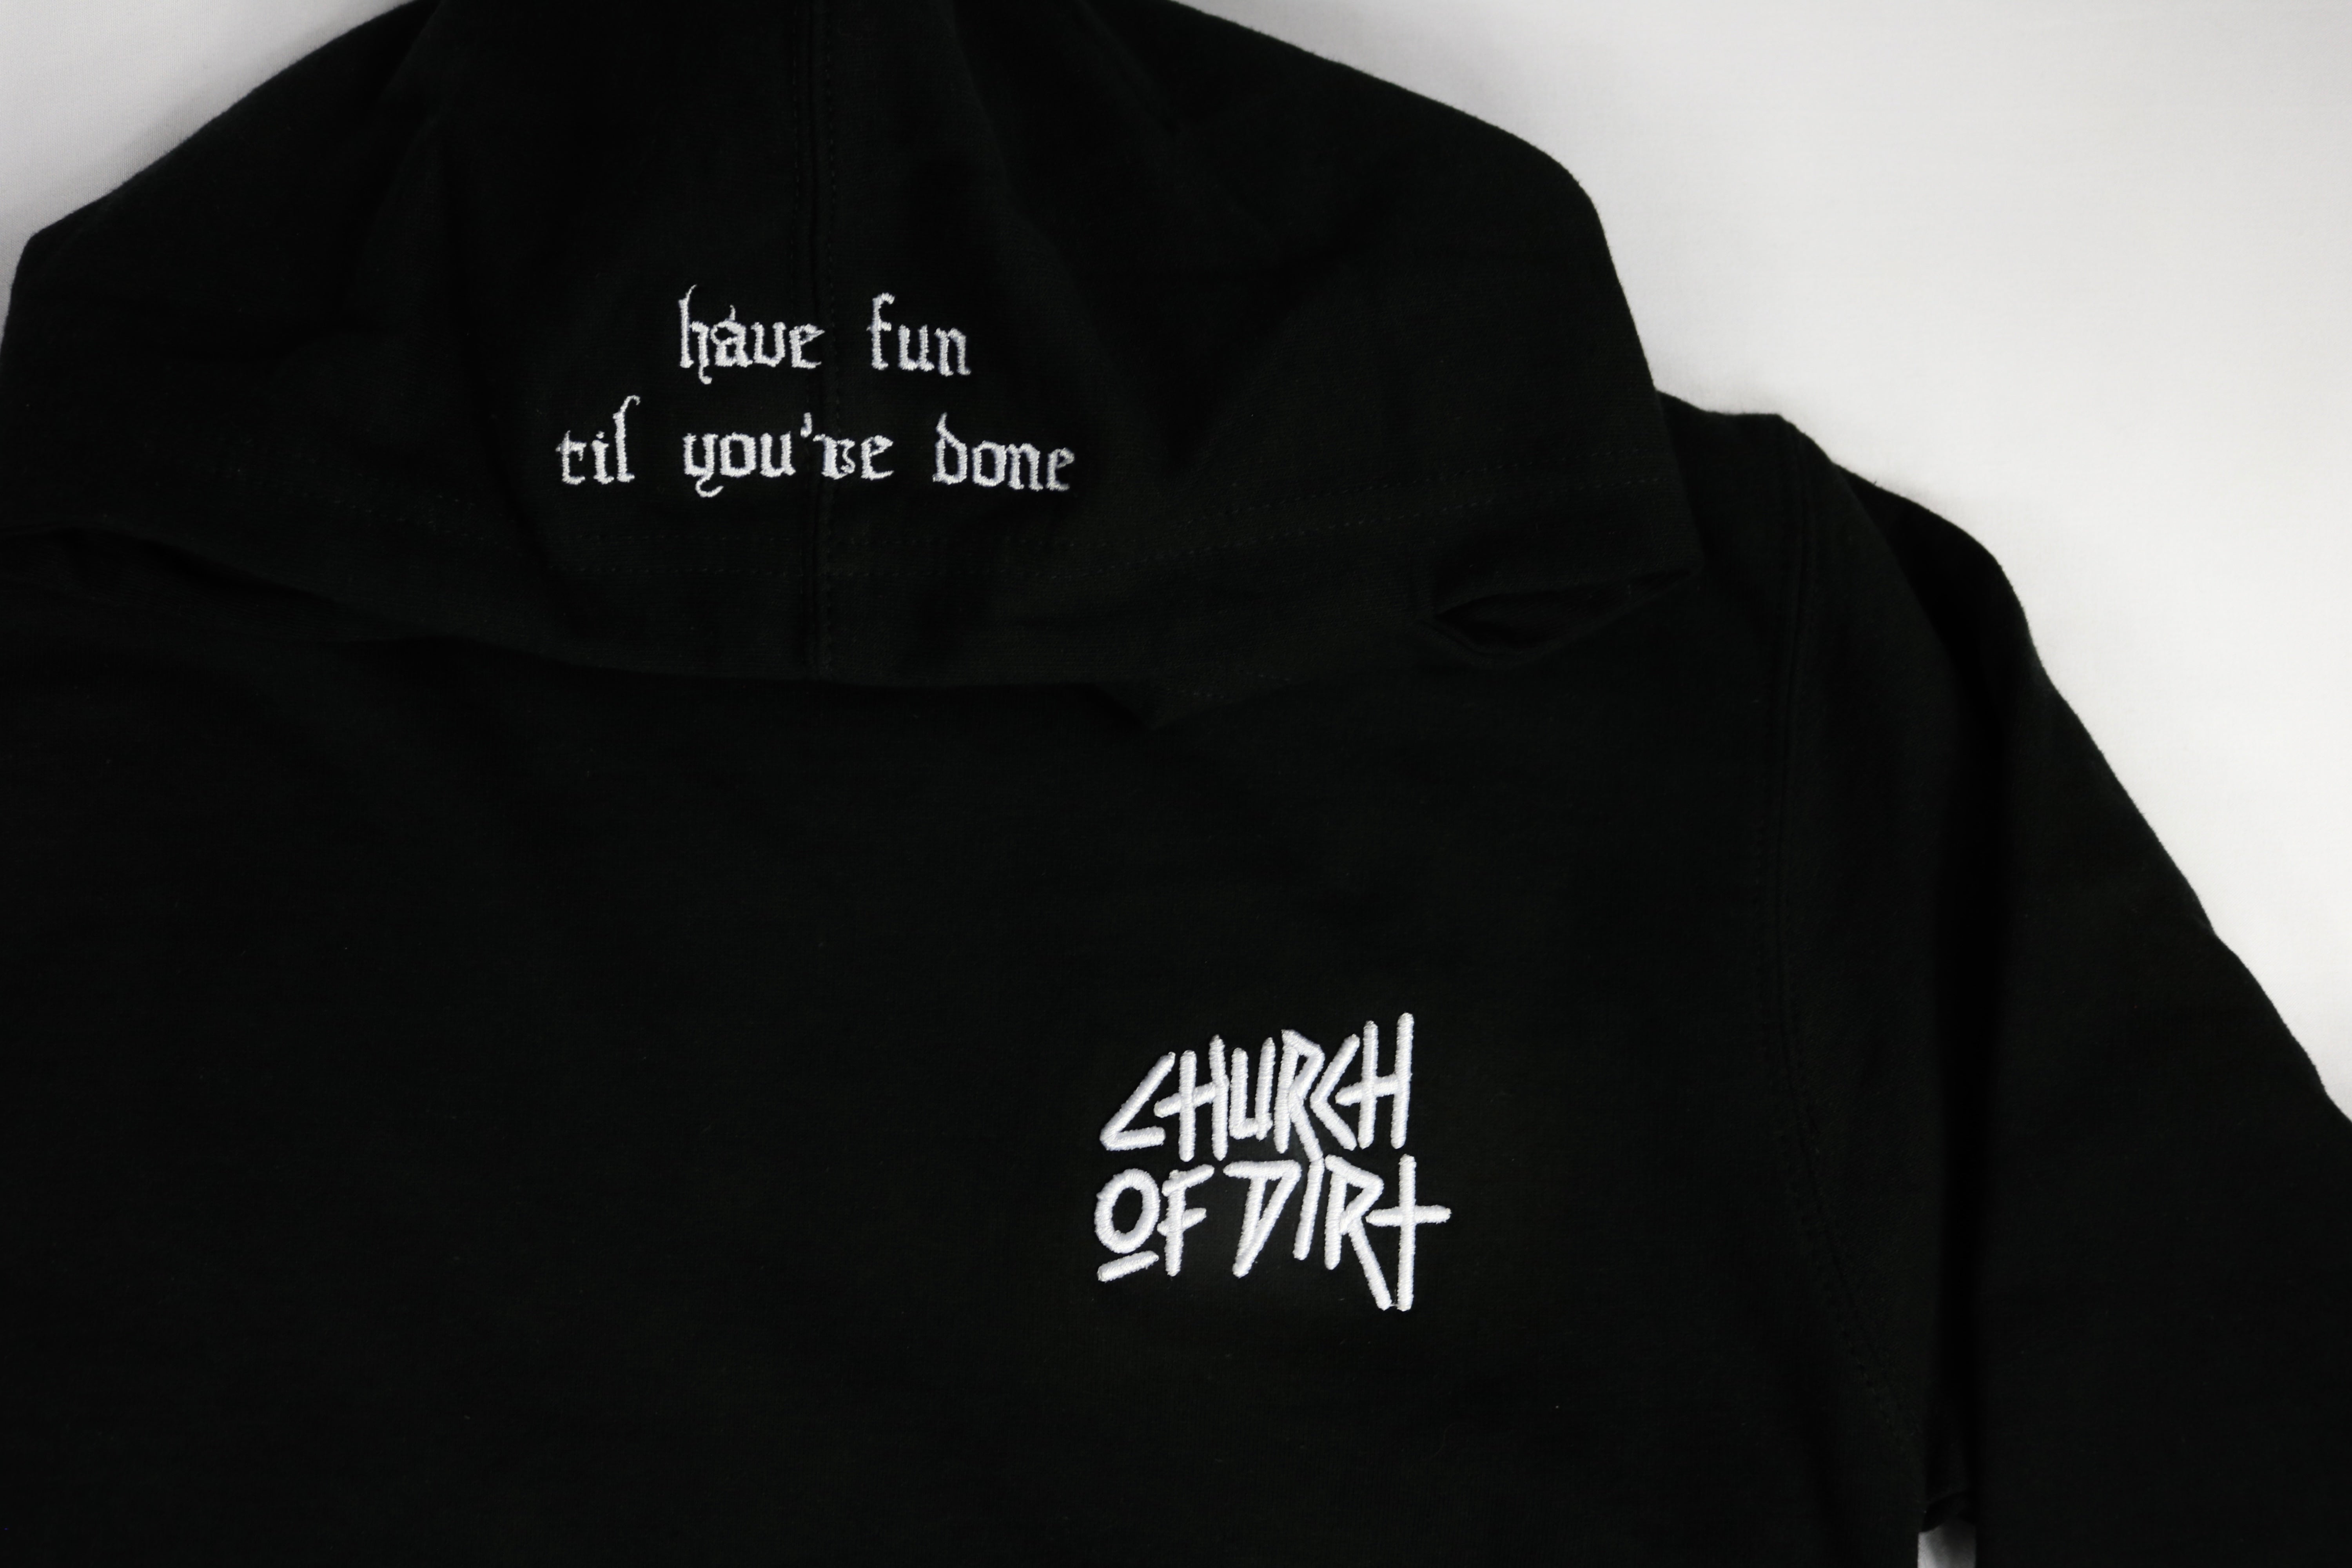 Youth Black Embroidered Dirt Surfer Hoodie